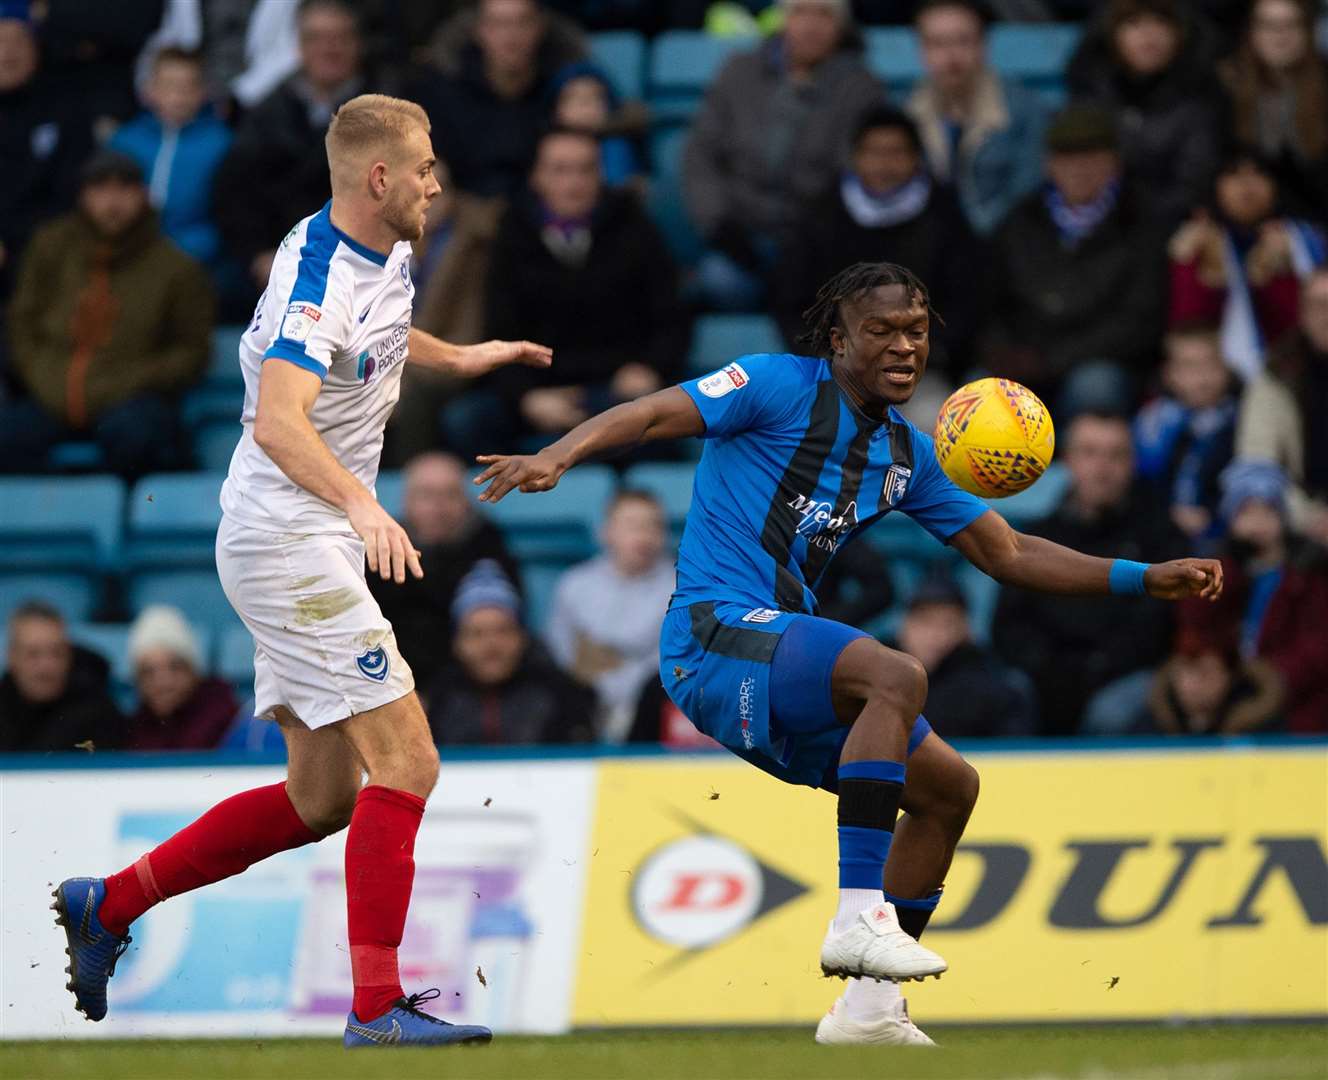 Noel Mbo made his only appearance in the league for Gillingham against Portsmouth